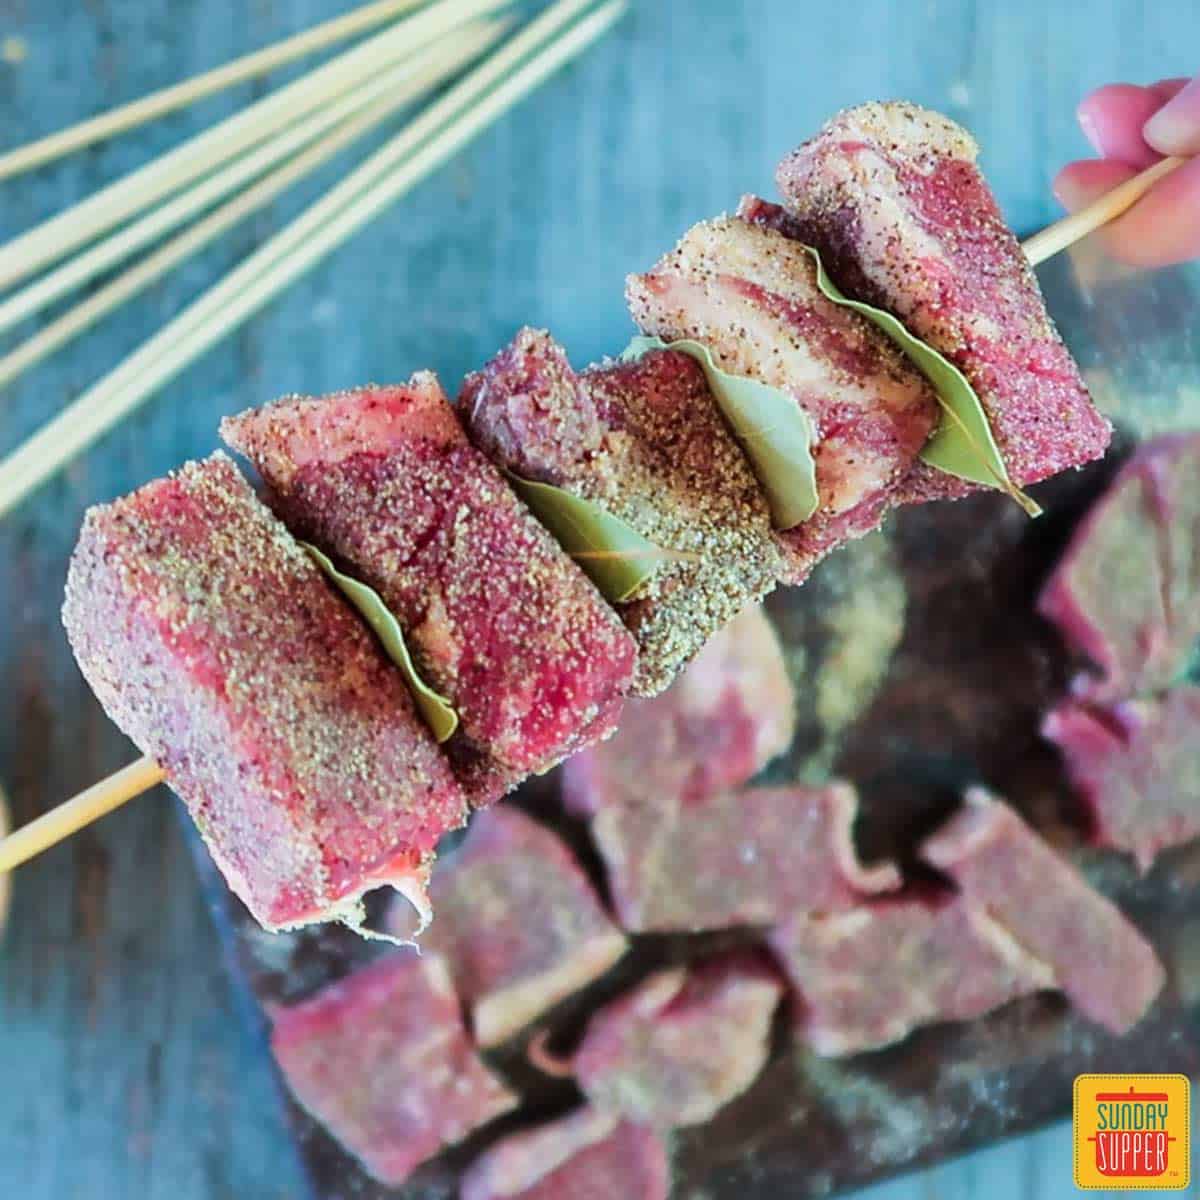 Holding a skewer layered with strip steak cubes and bay leaves in between each piece of steak